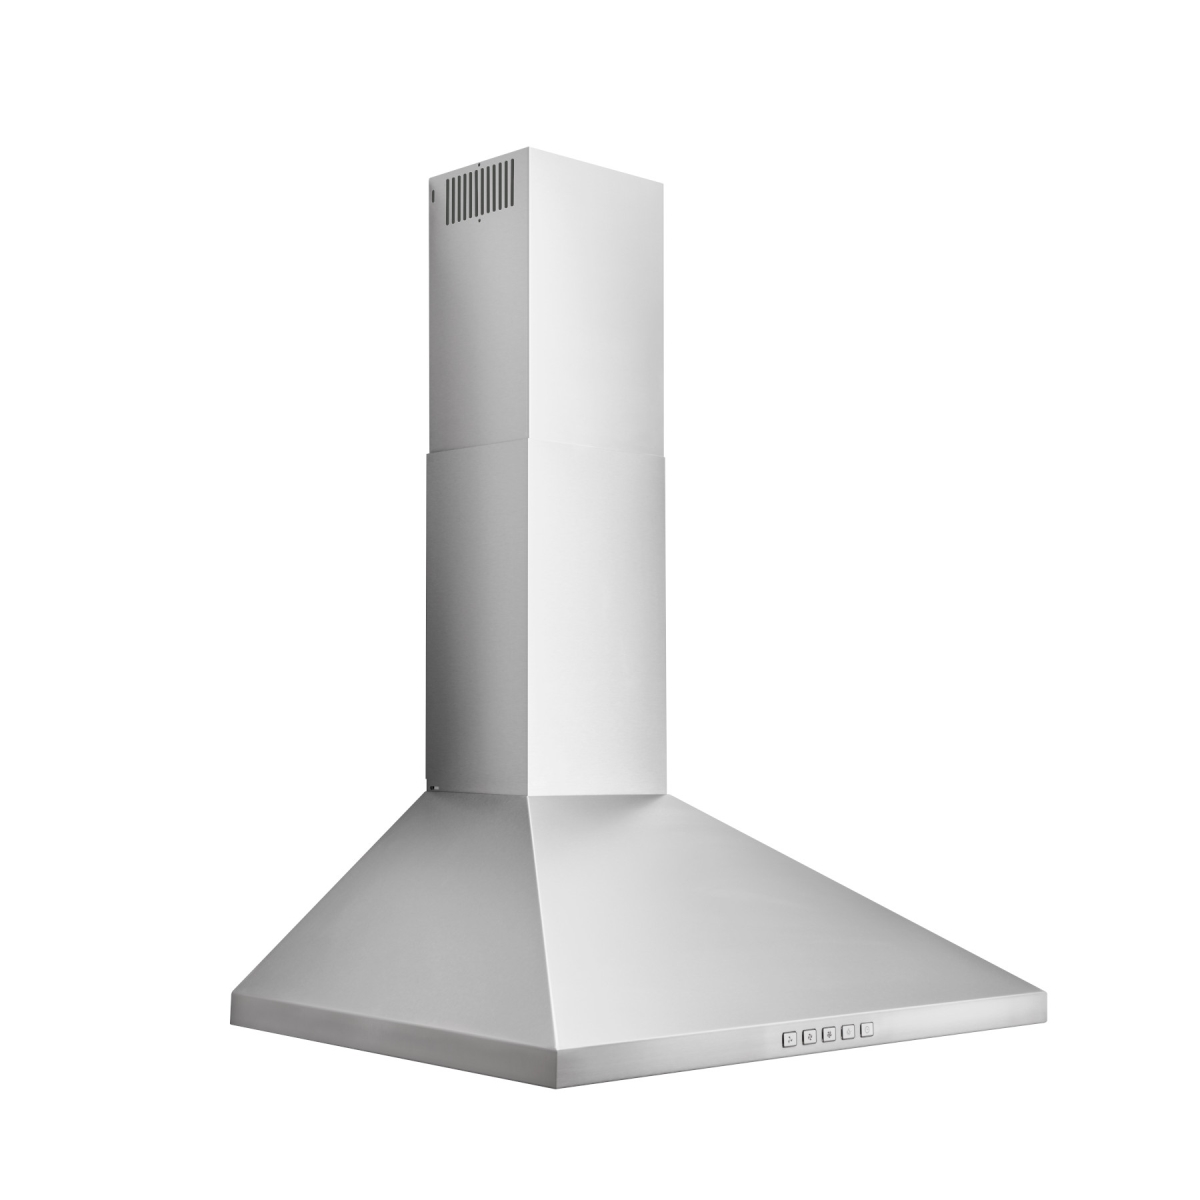 Picture of Broan BWP1304SS 30 in. Convertible Wall-Mount Pyramidal Chimney Range Hood